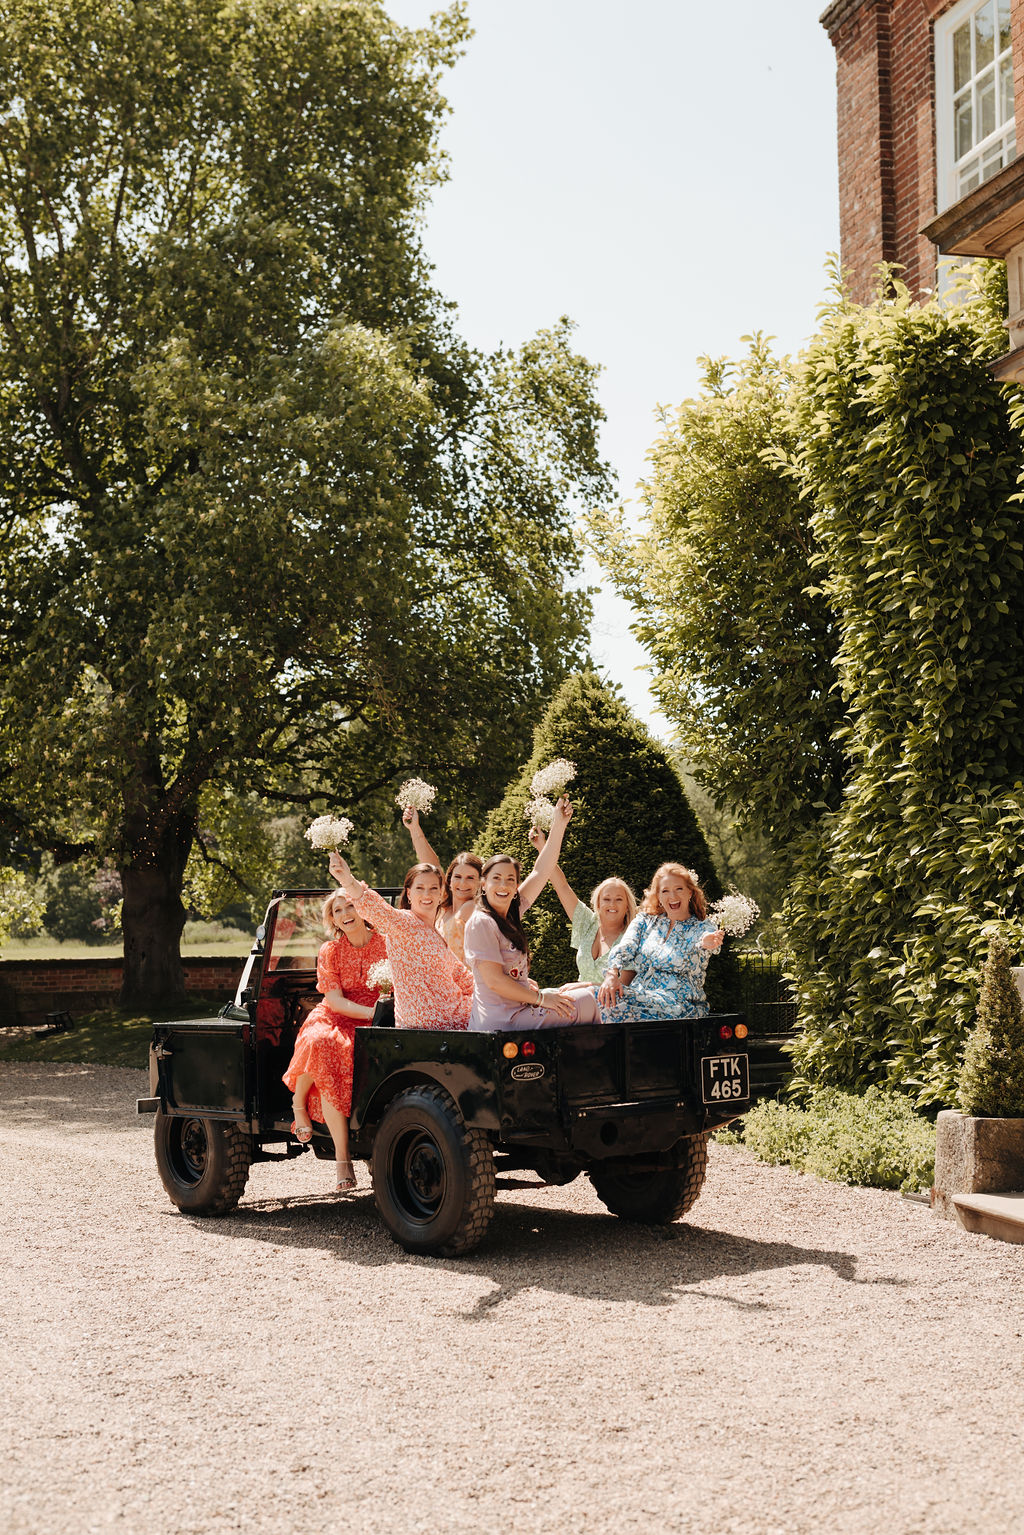 Six adult bridesmaids wearing mismatched dresses in yellow, lilac, red, blue and green sit in the back of an open top jeep waving their gypsophila bouquets aloft